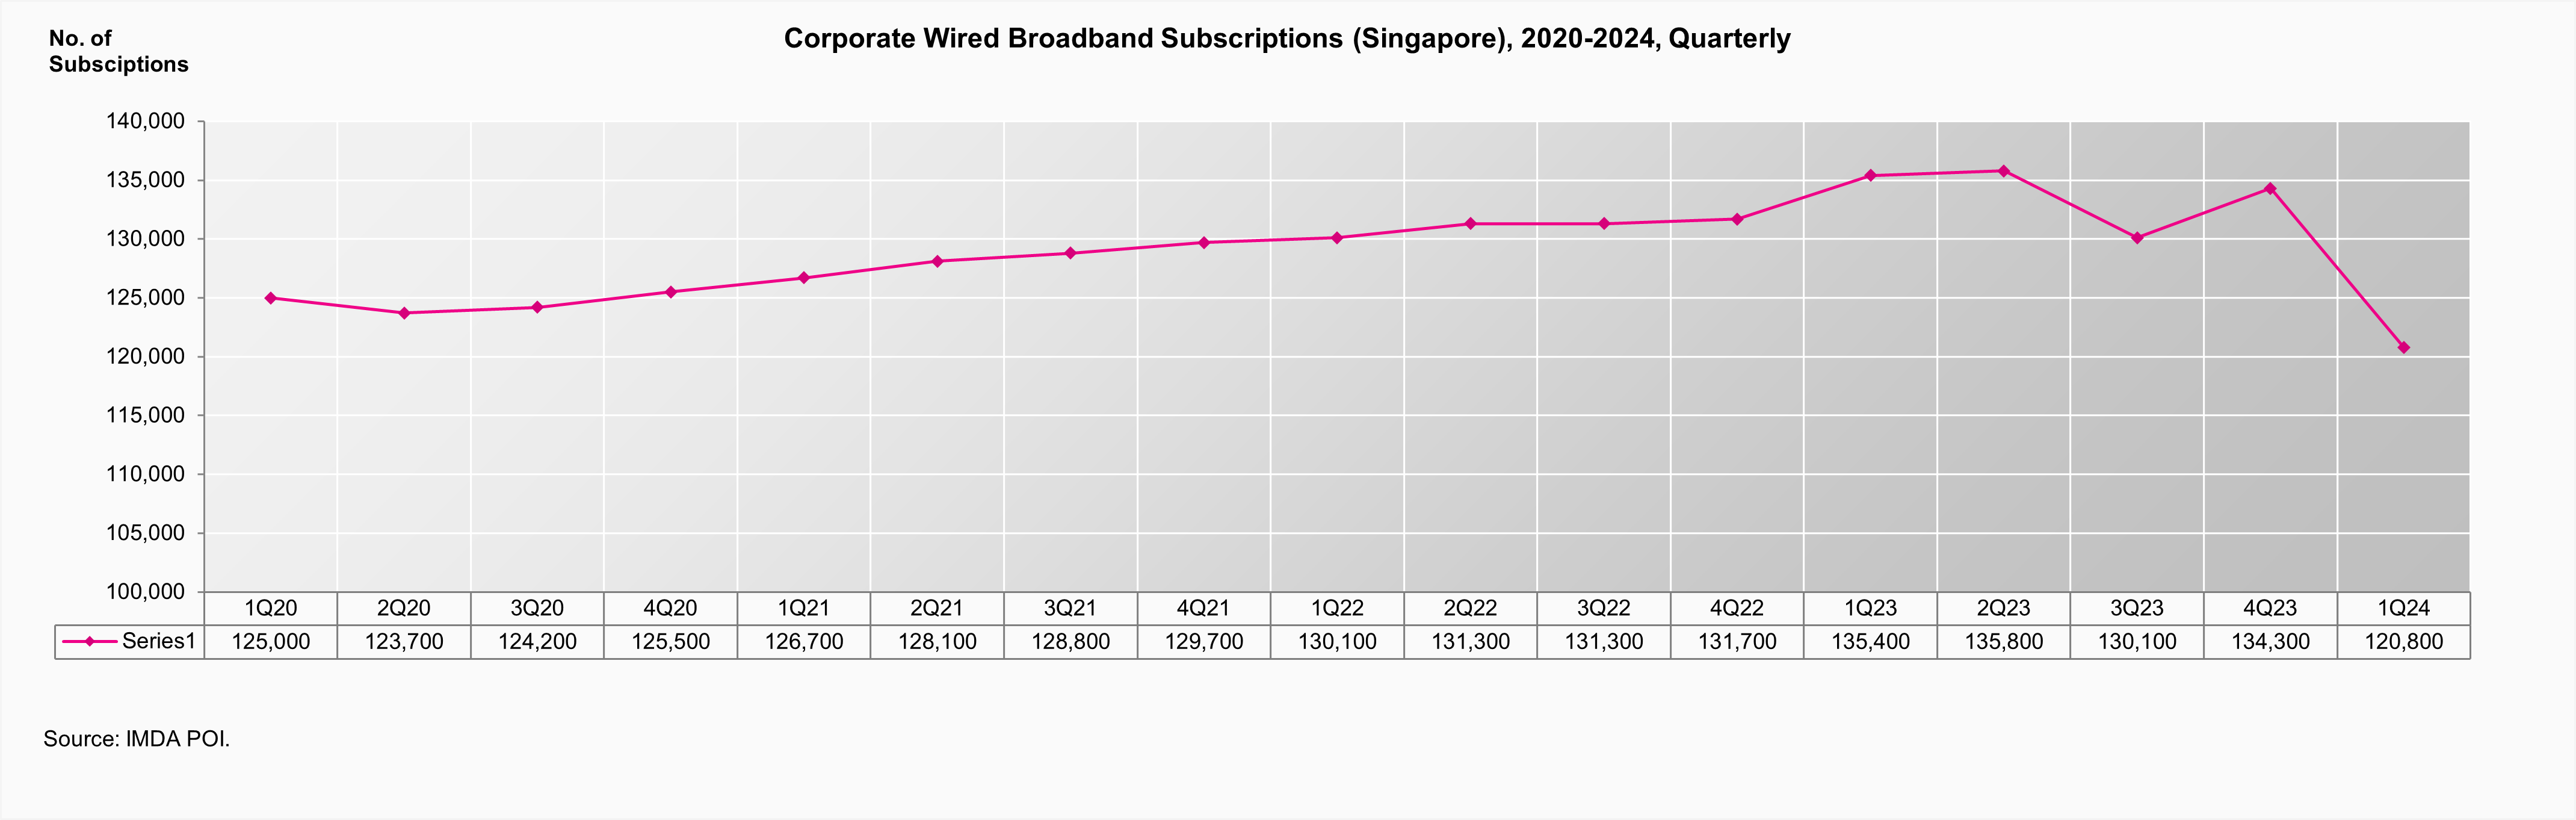 Corporate Wired Broadband Subscriptions 1Q24